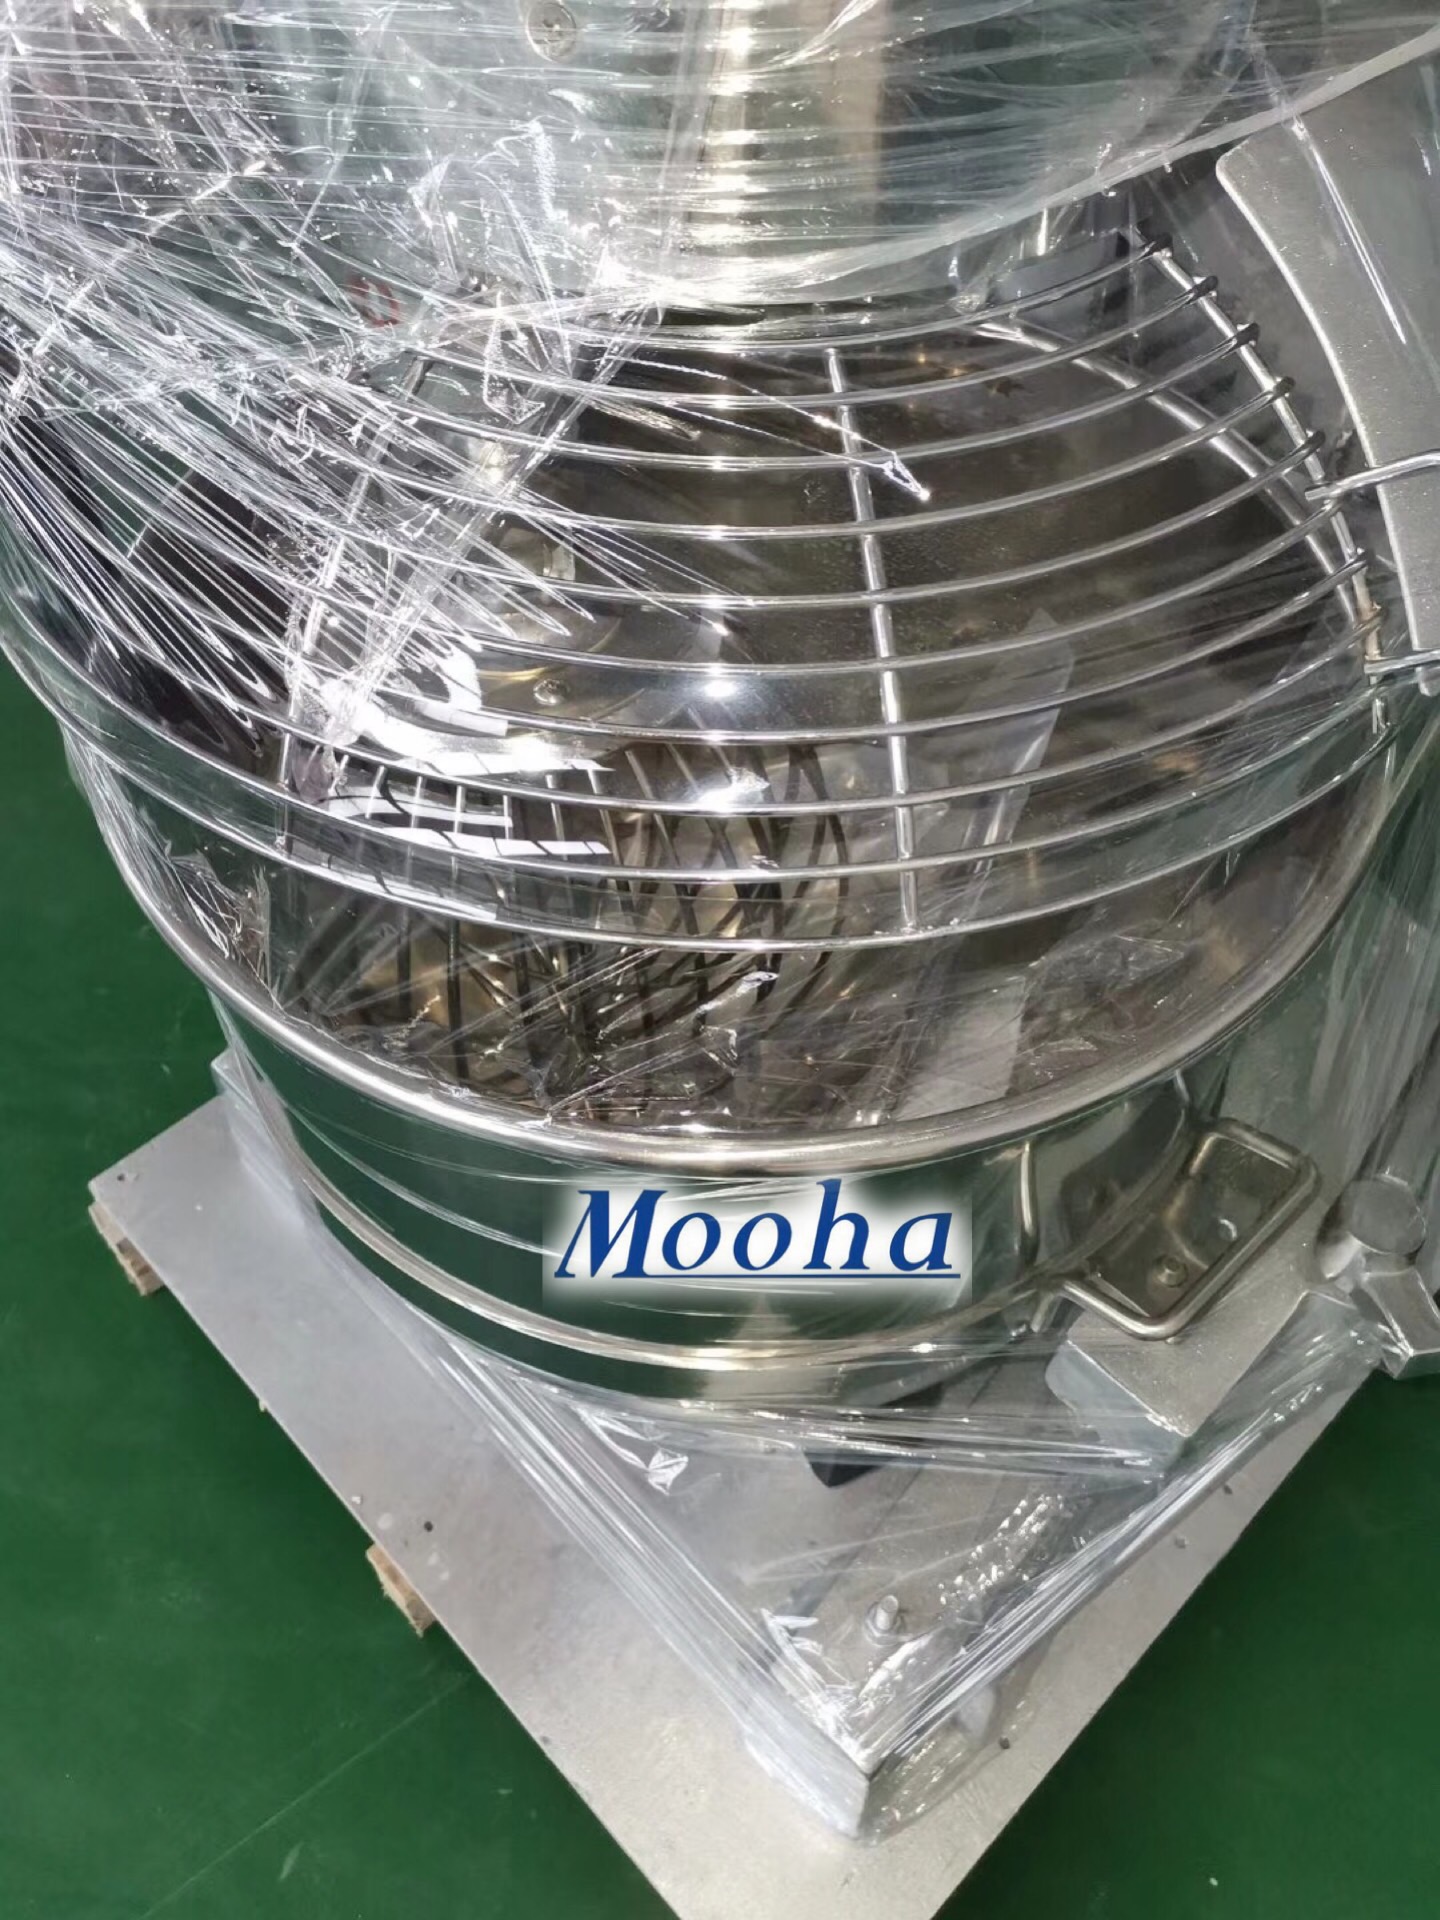 Commercial 50 Liters Planetary Mixer High Quality 5-9 KG powder Kneading Cake Biscuits Cookies Cream Egg Butter Mixing Bakery Machine